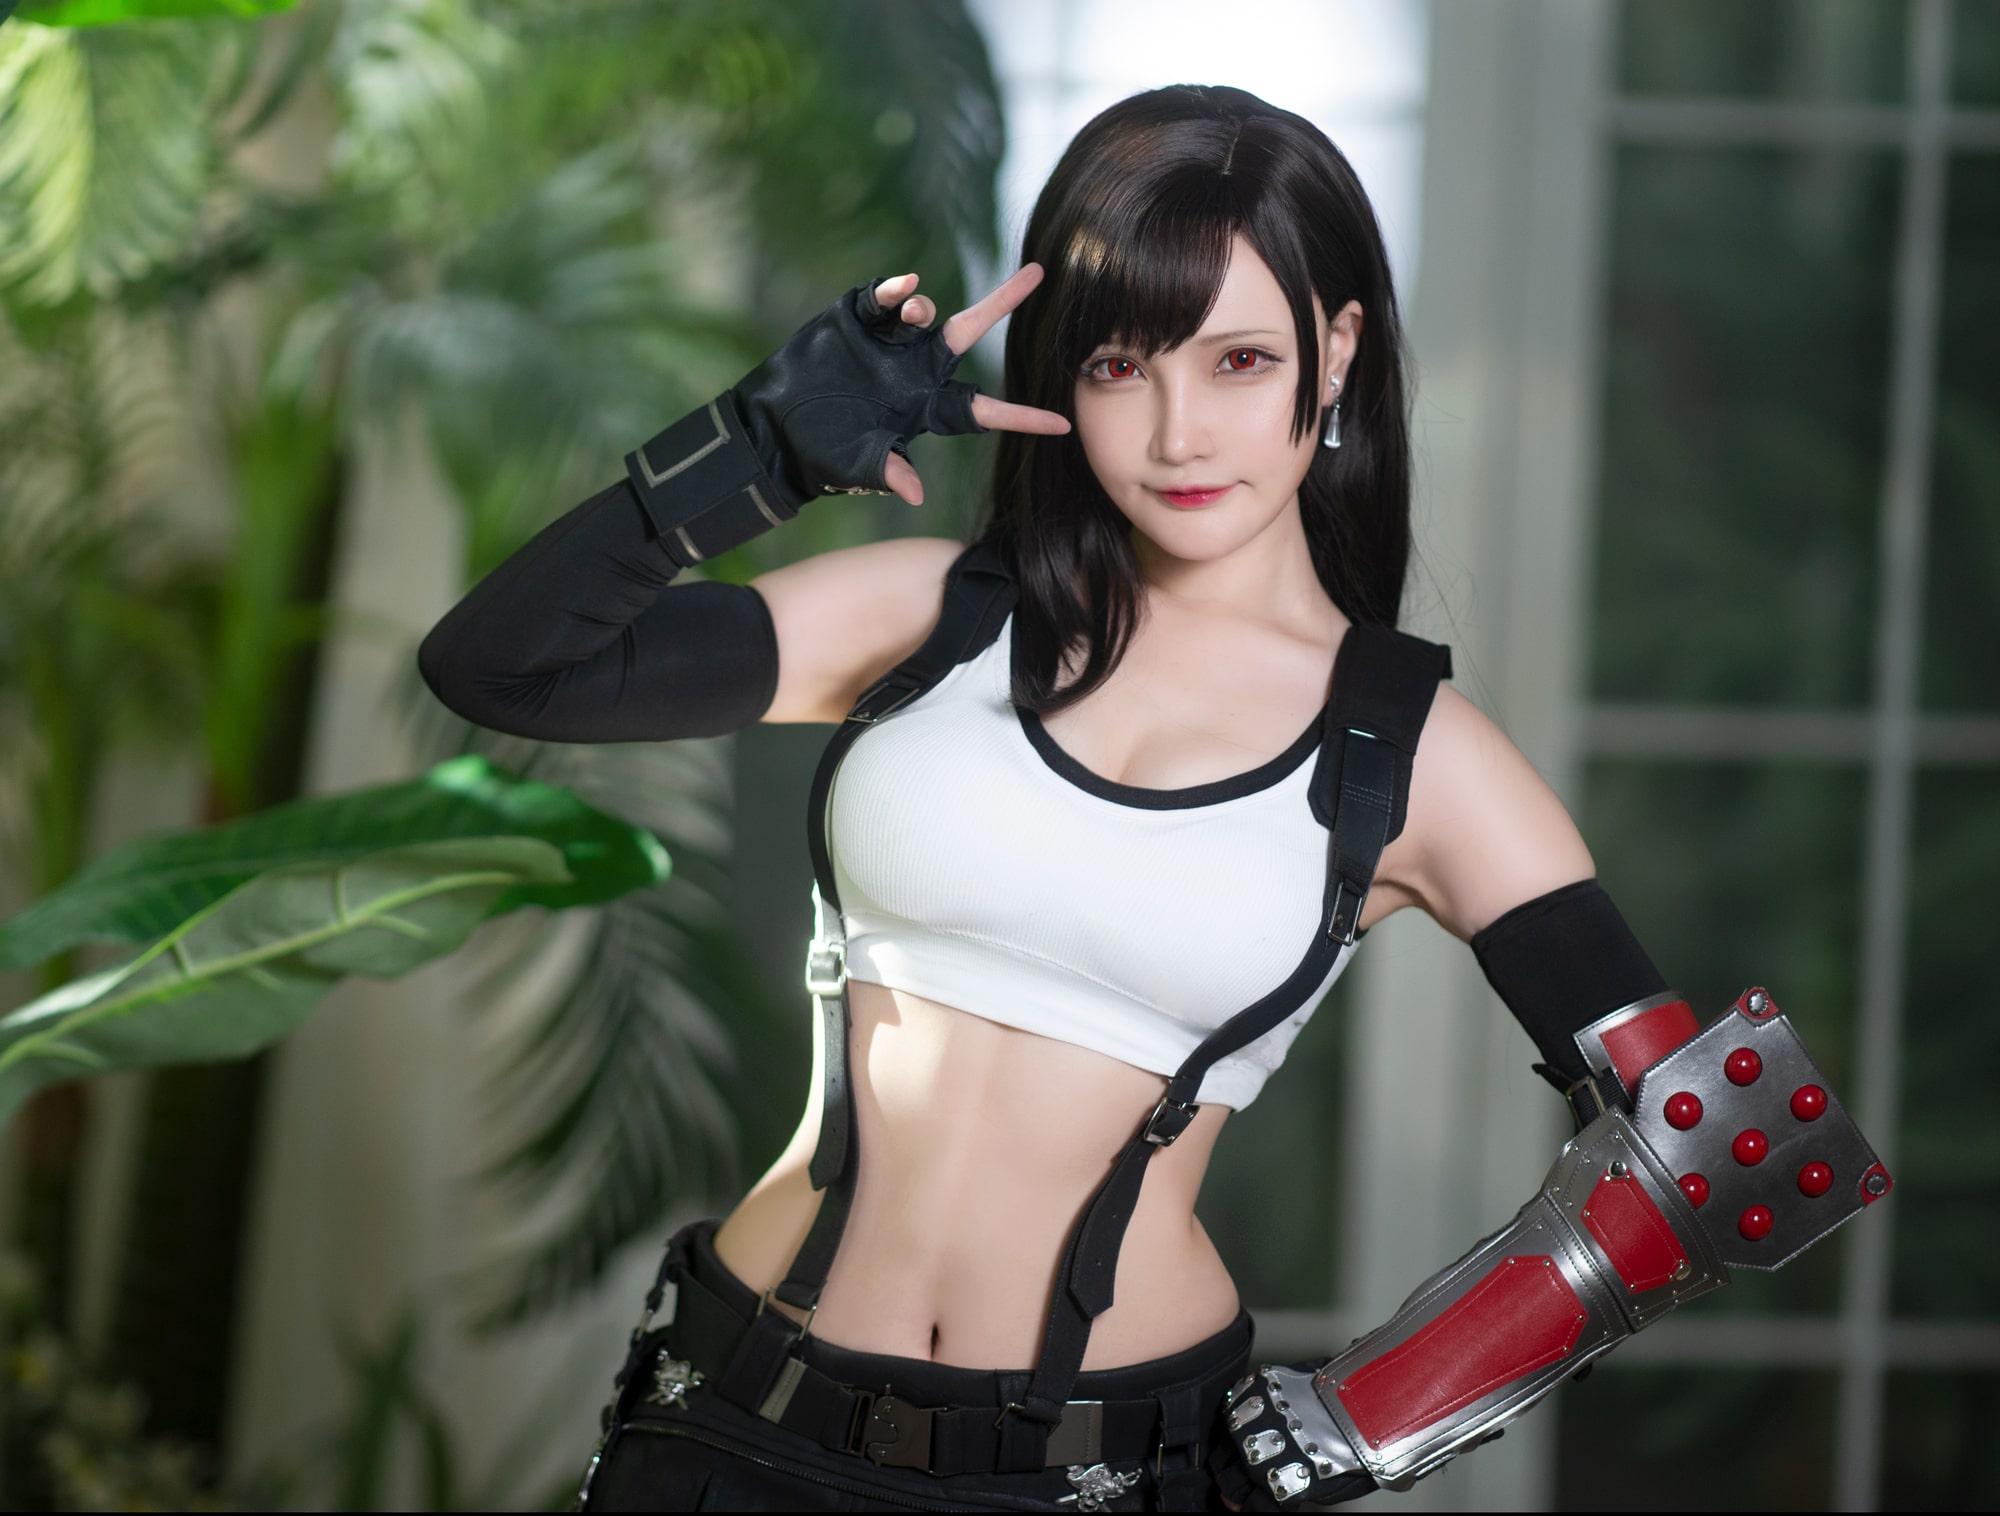 This is the sample picture from Senya Miku 千夜未来 - Tifa post. Click here to see image full size.